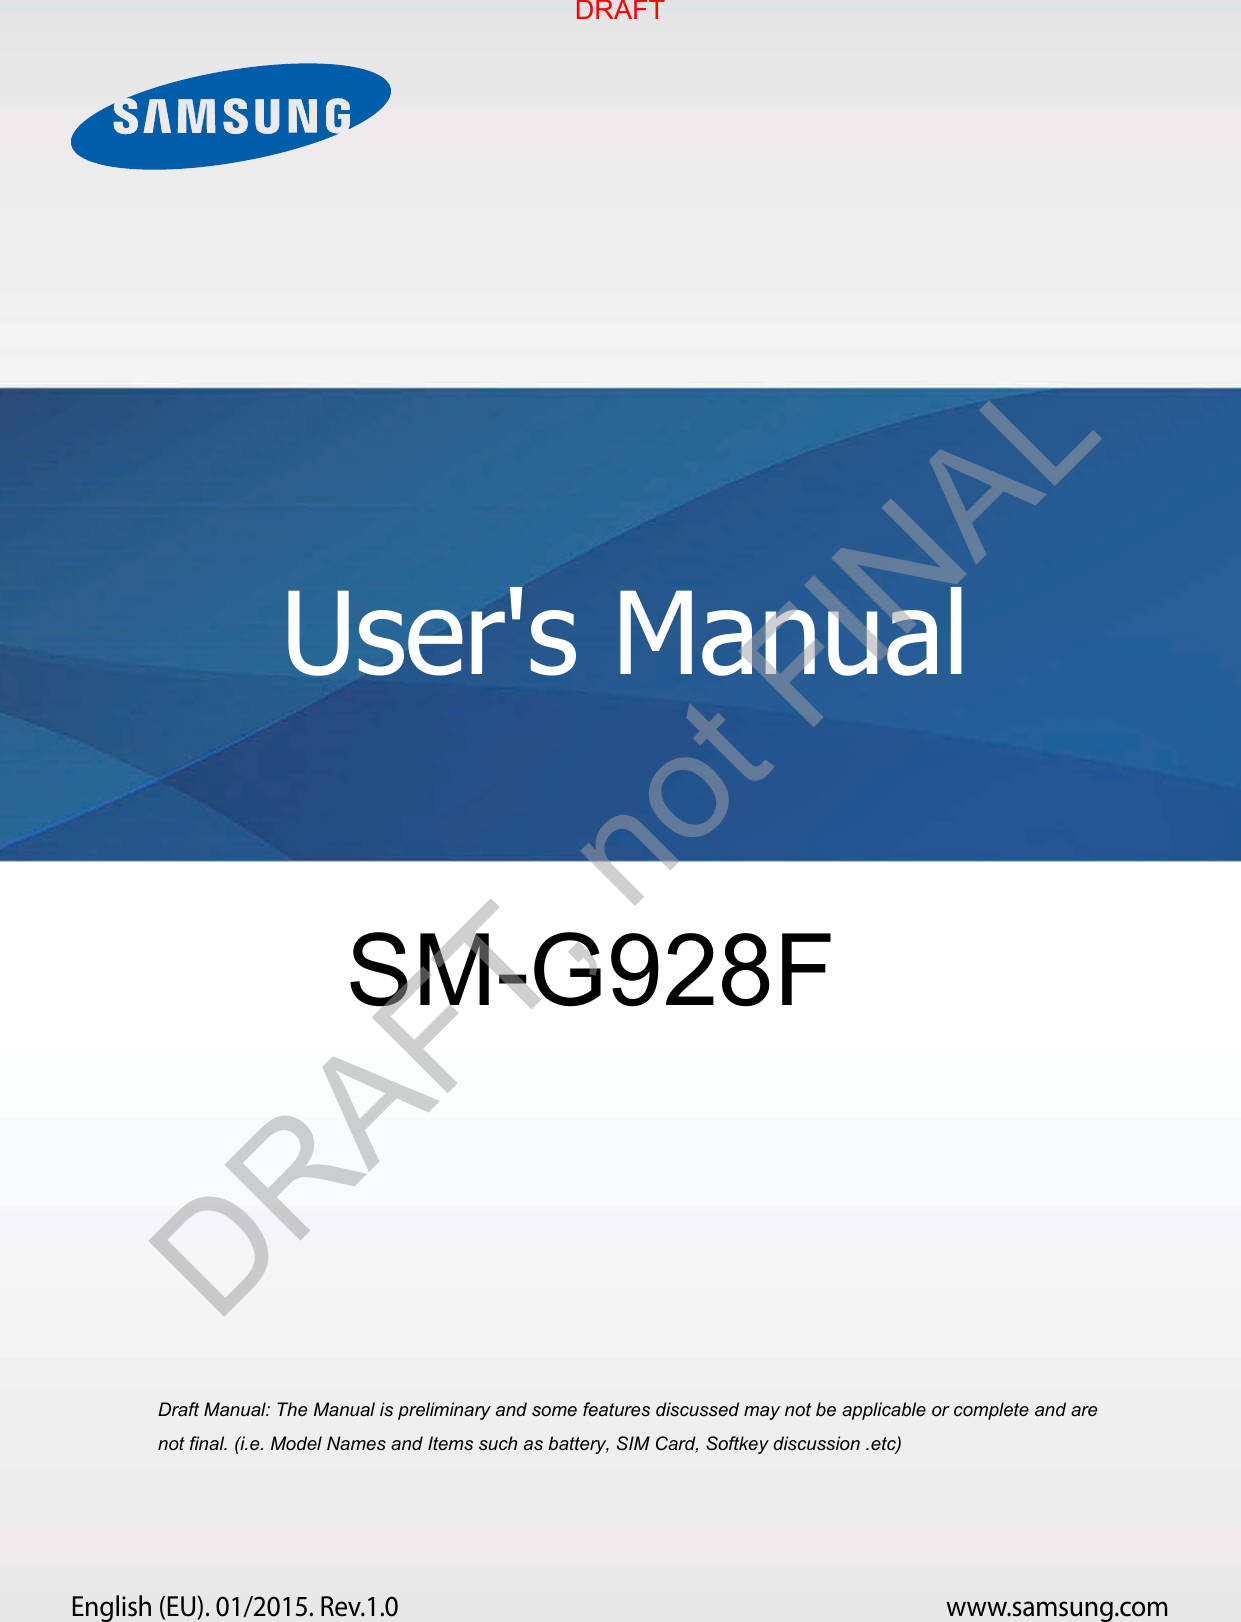 www.samsung.comUser&apos;s ManualEnglish (EU). 01/2015. Rev.1.0a ana  ana  na and  a dd a n  aa   and a n na  d a and   a a  ad  dn SM-G928F DRAFTDRAFT, not FINAL